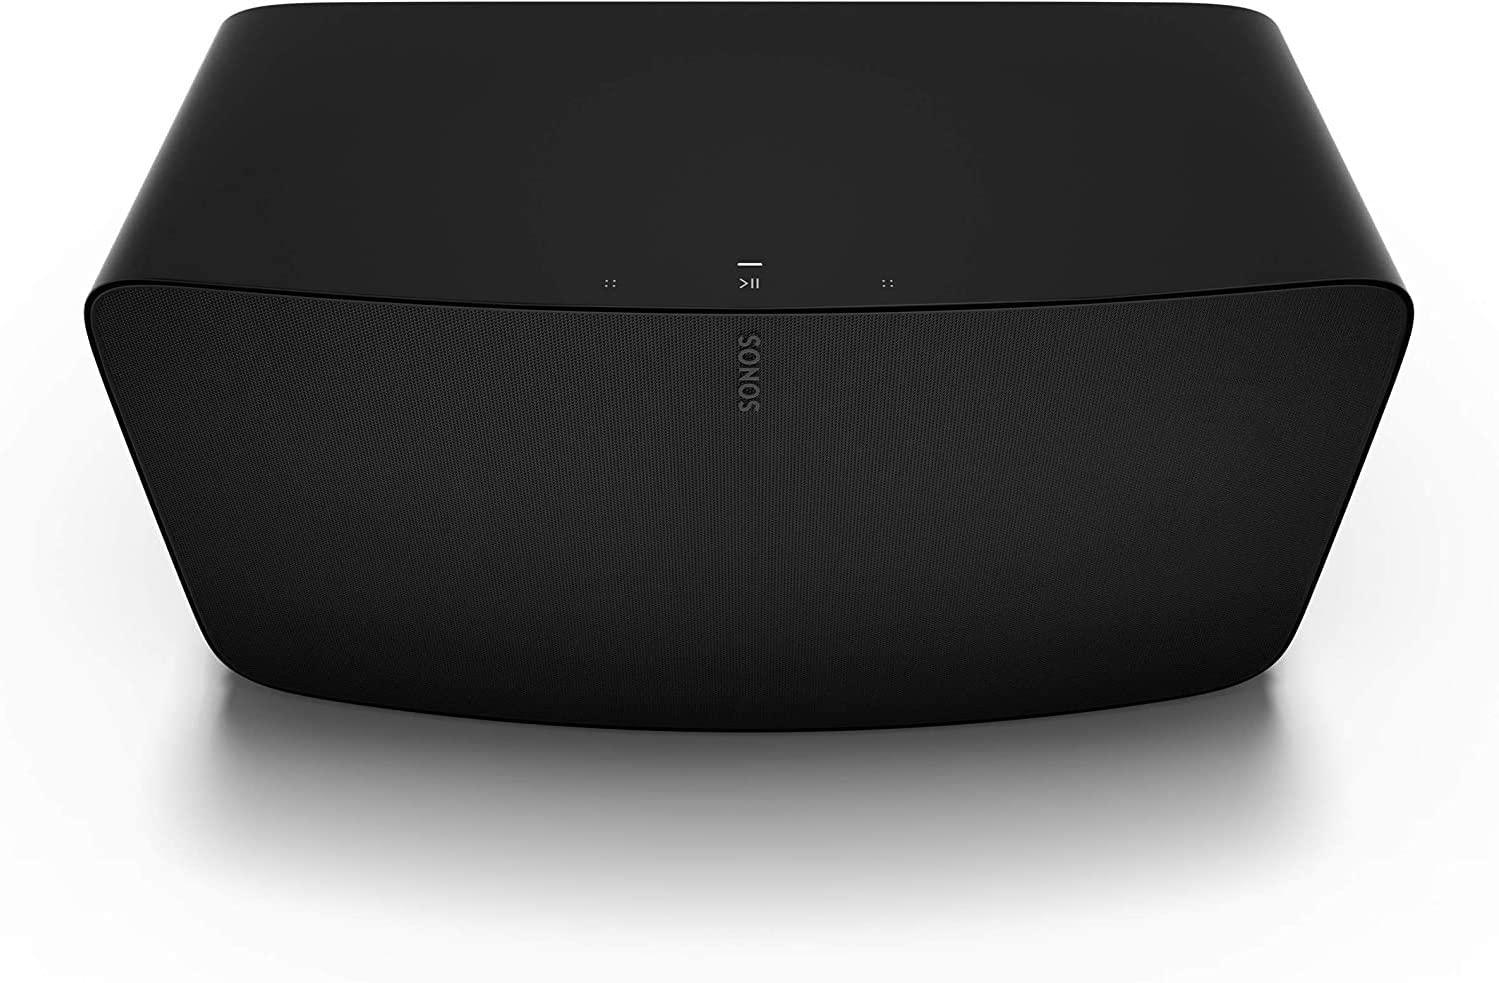 Villain Færøerne bacon Sonos Five – Test and Review – Review in Detail